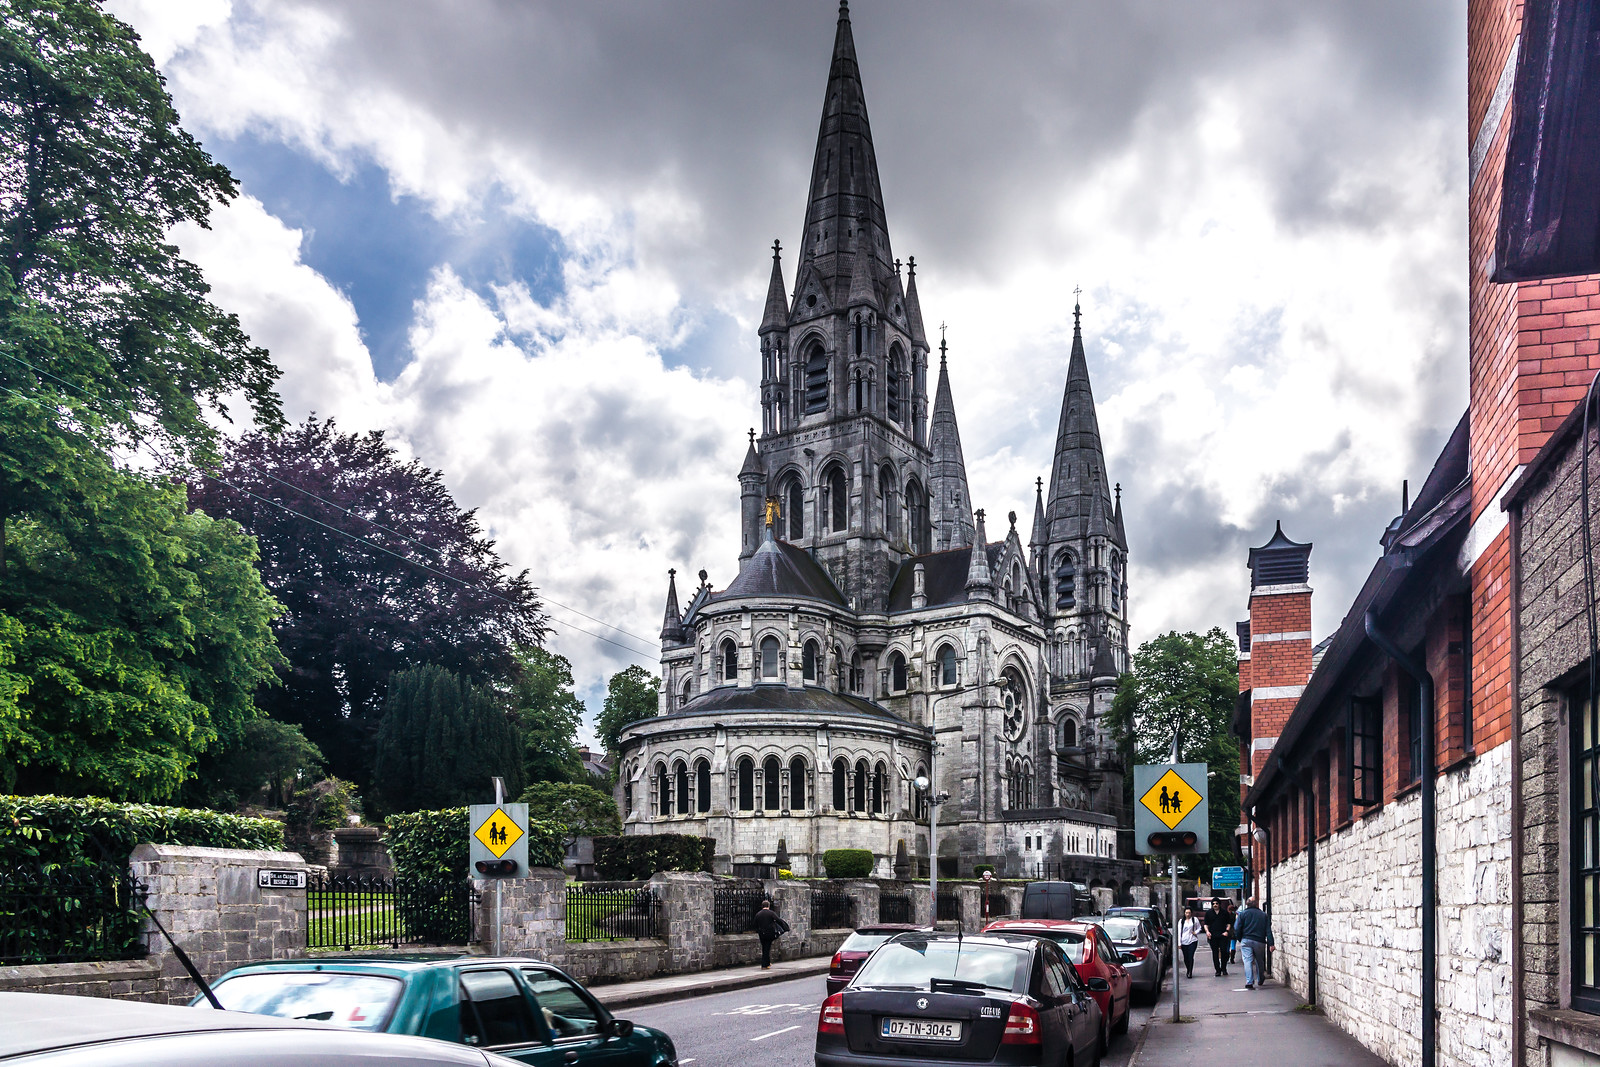 St. Fin Barre's Cathedral is the premier public building in Cork